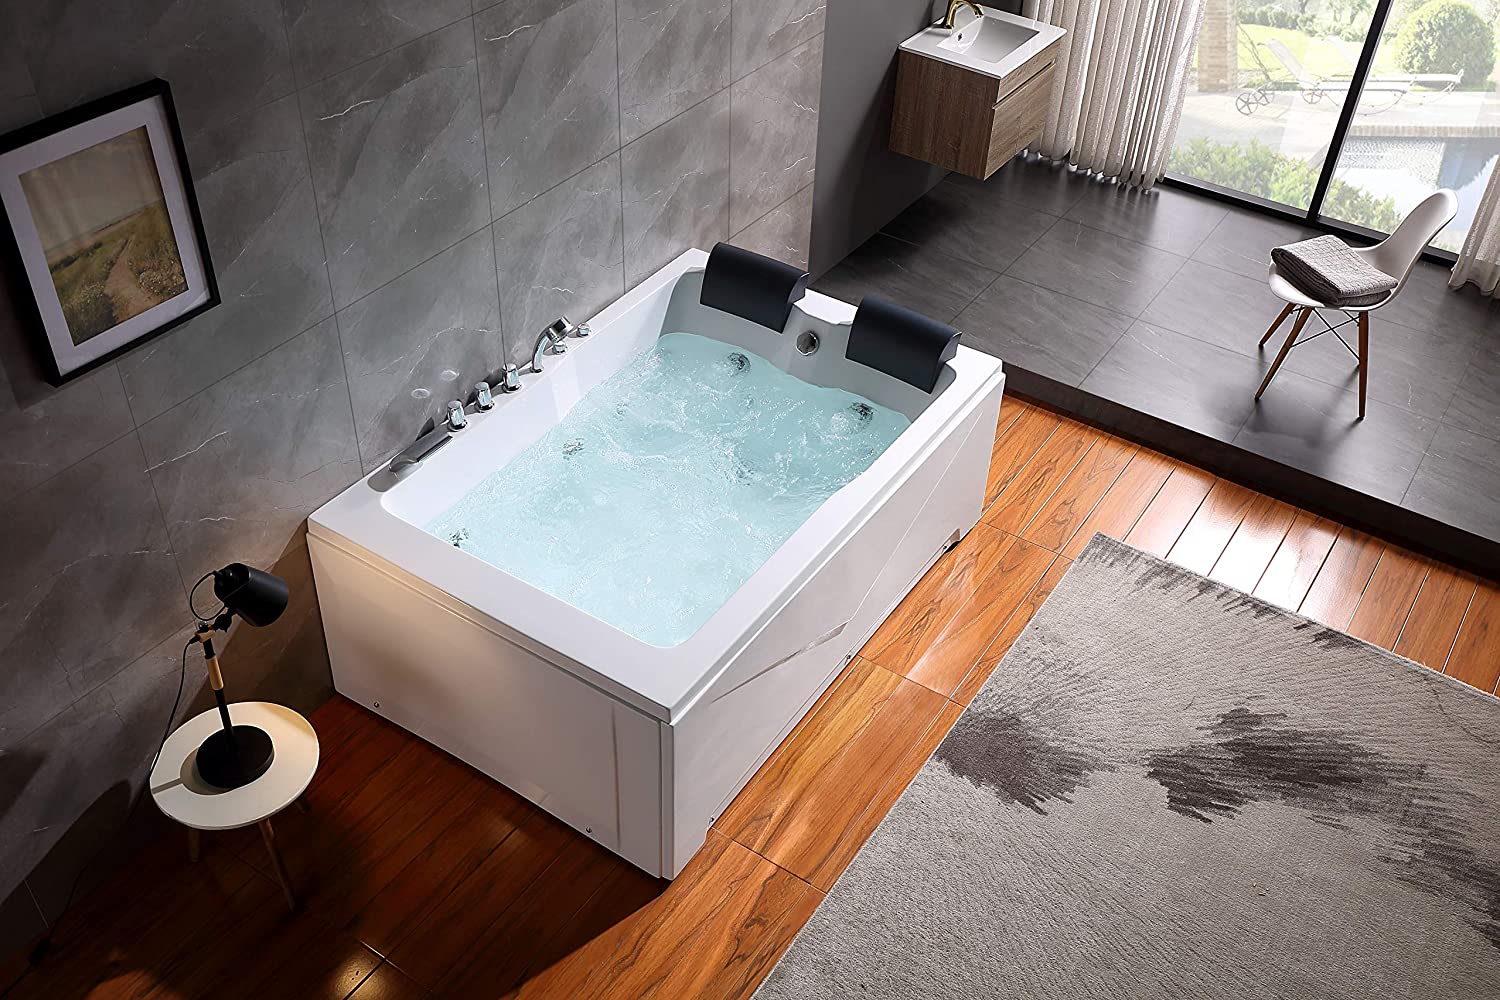 Looking down on the best whirlpool tub option installed in a modern bathroom